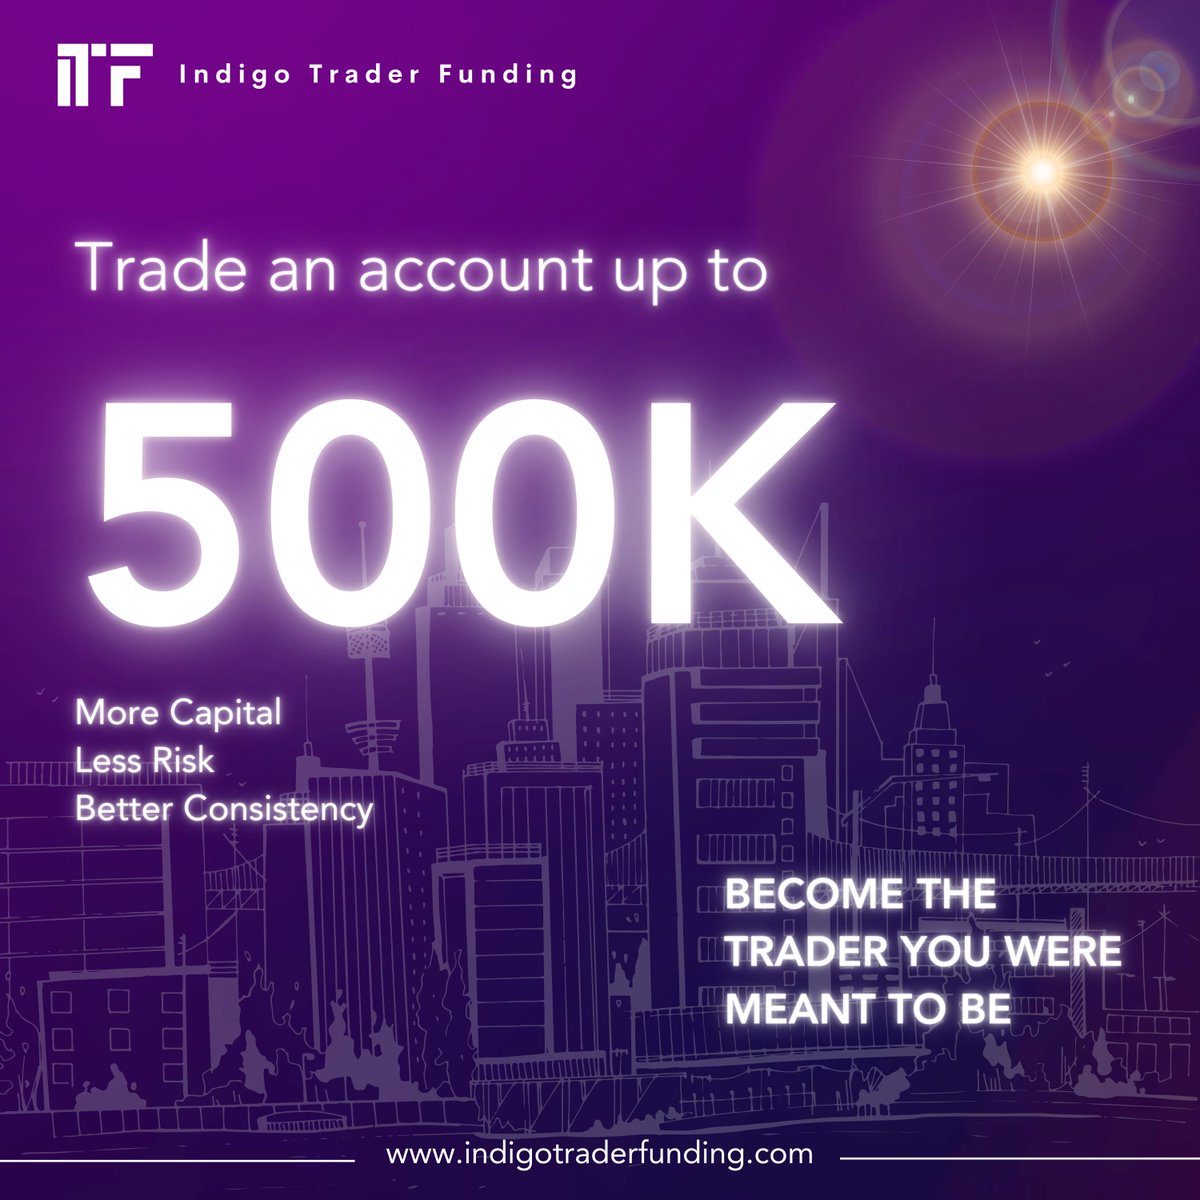 The aim for prop firm traders should always be to collect larger funding, with the ultimate goal of achieving more profitable results through lower risk per trade and more consistency. Thats why we allow our traders to take 500K evaluations. Indigo Trader Funding is here to